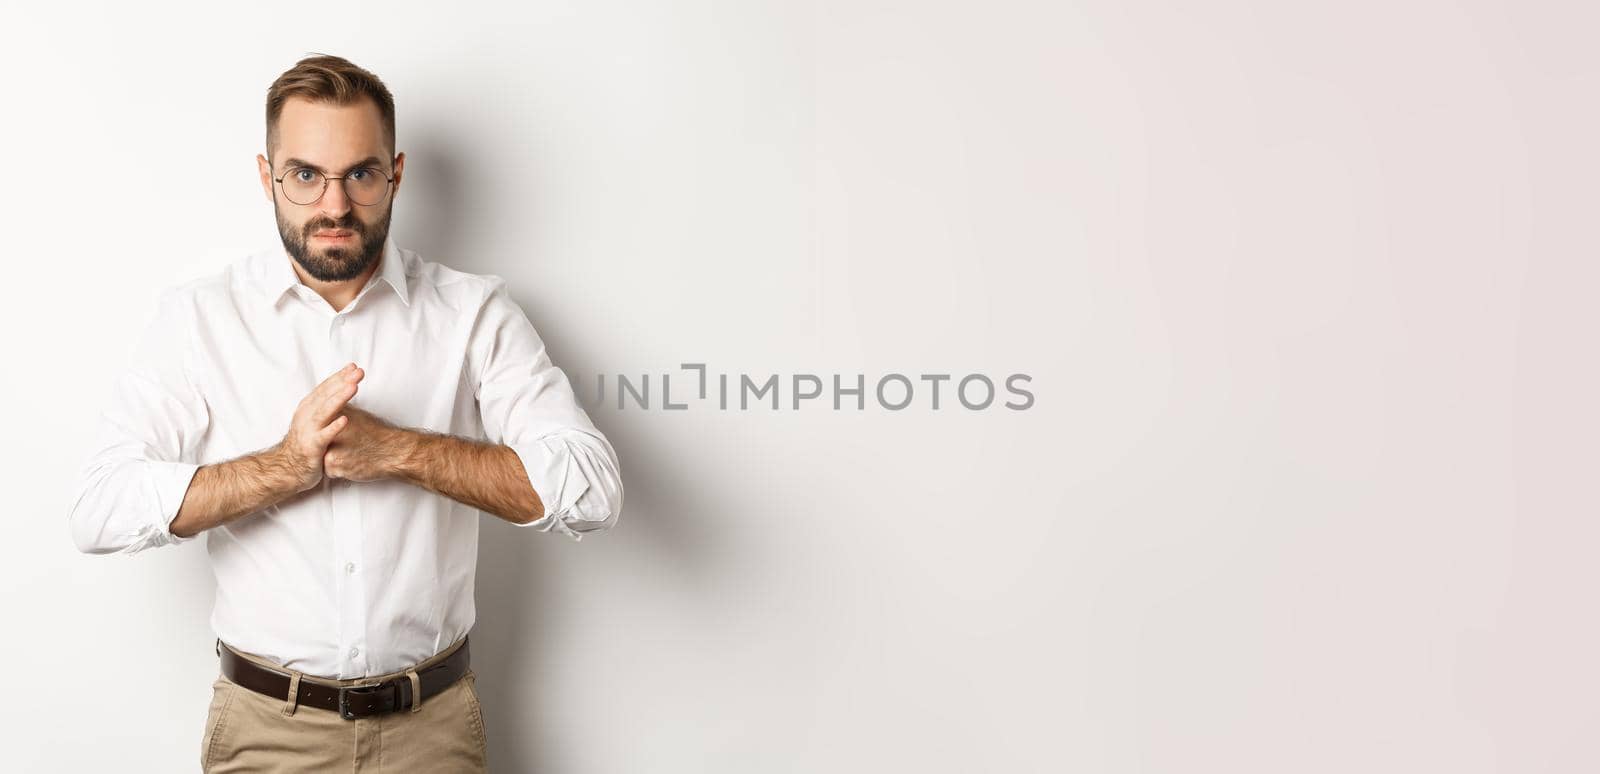 Angry man crack knuckles, want to punch someone, standing mad against white background.